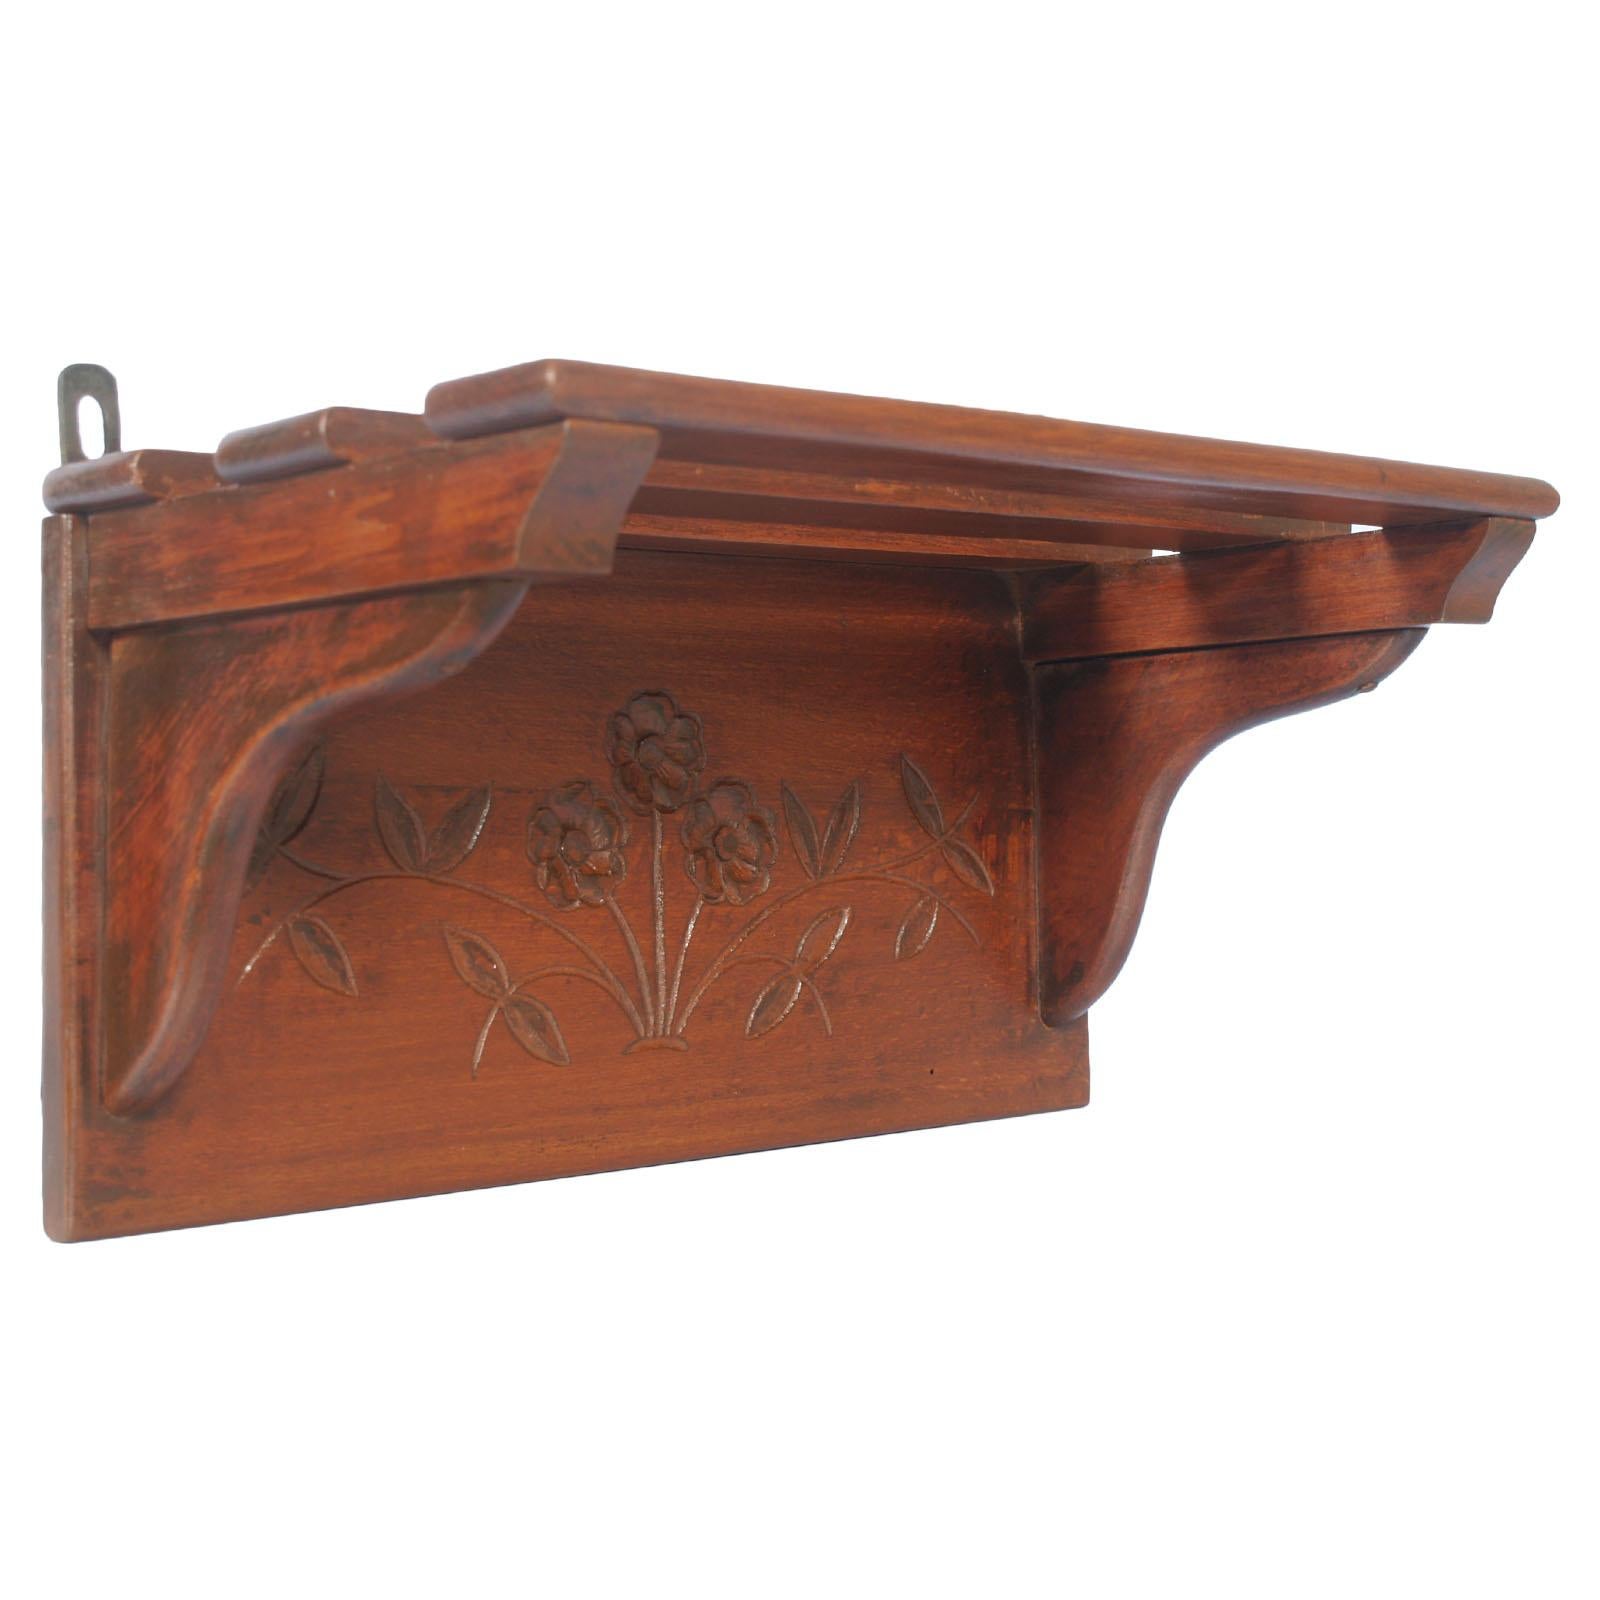 Early 20th Century Small Tyrolean Wall Shelf, Art Nouveau, in Hand Carved Walnut